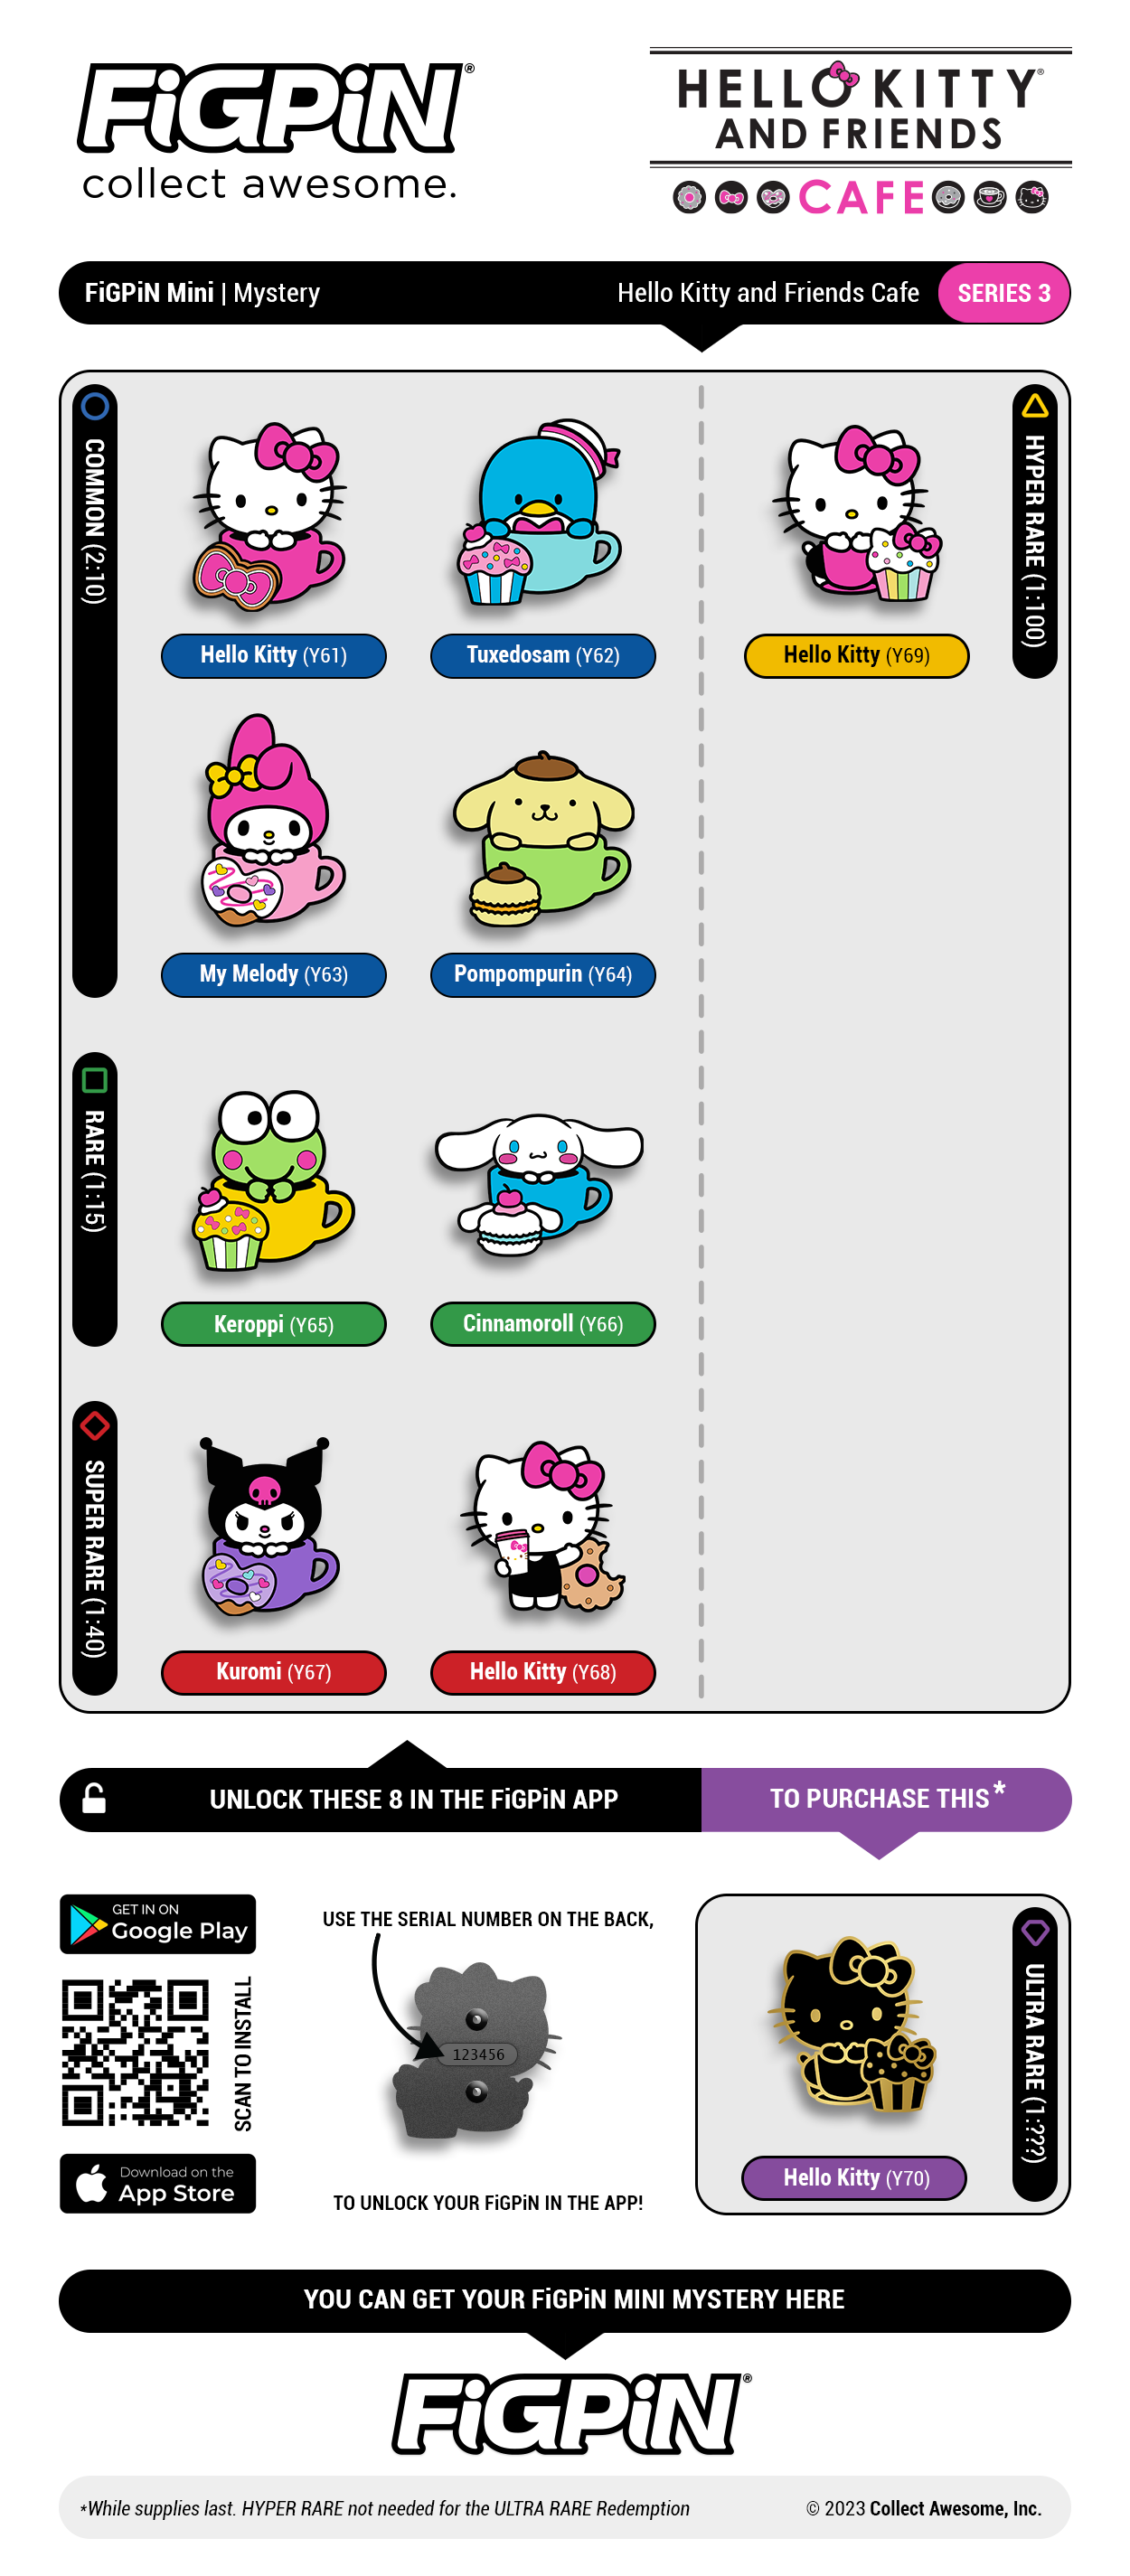 Hello Kitty and Friends Mystery Series 3 - CASE